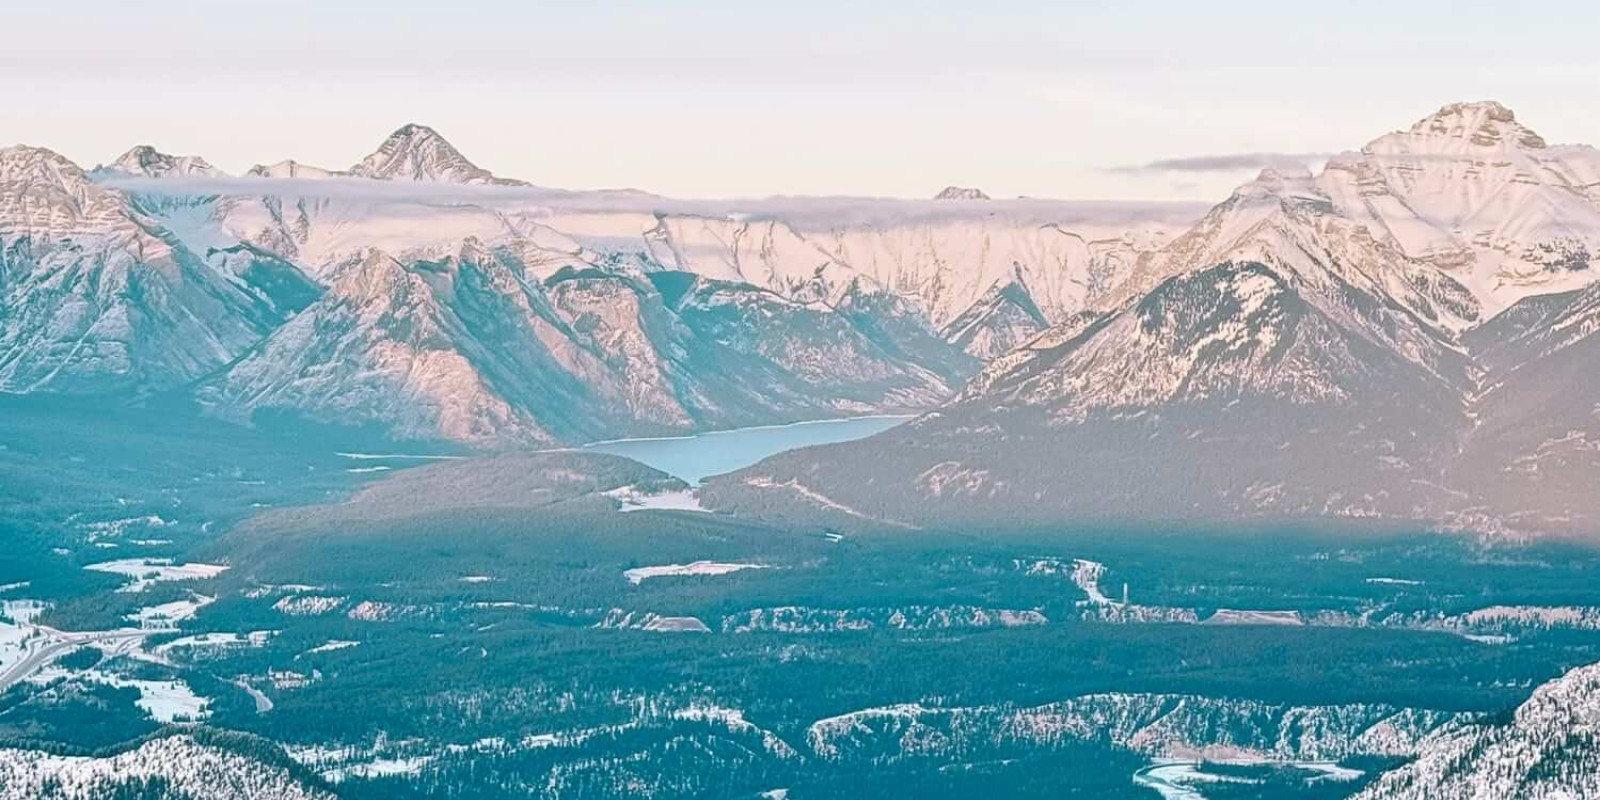 The mountains surrounding Banff, Canada from the top of a peak just outside of town.